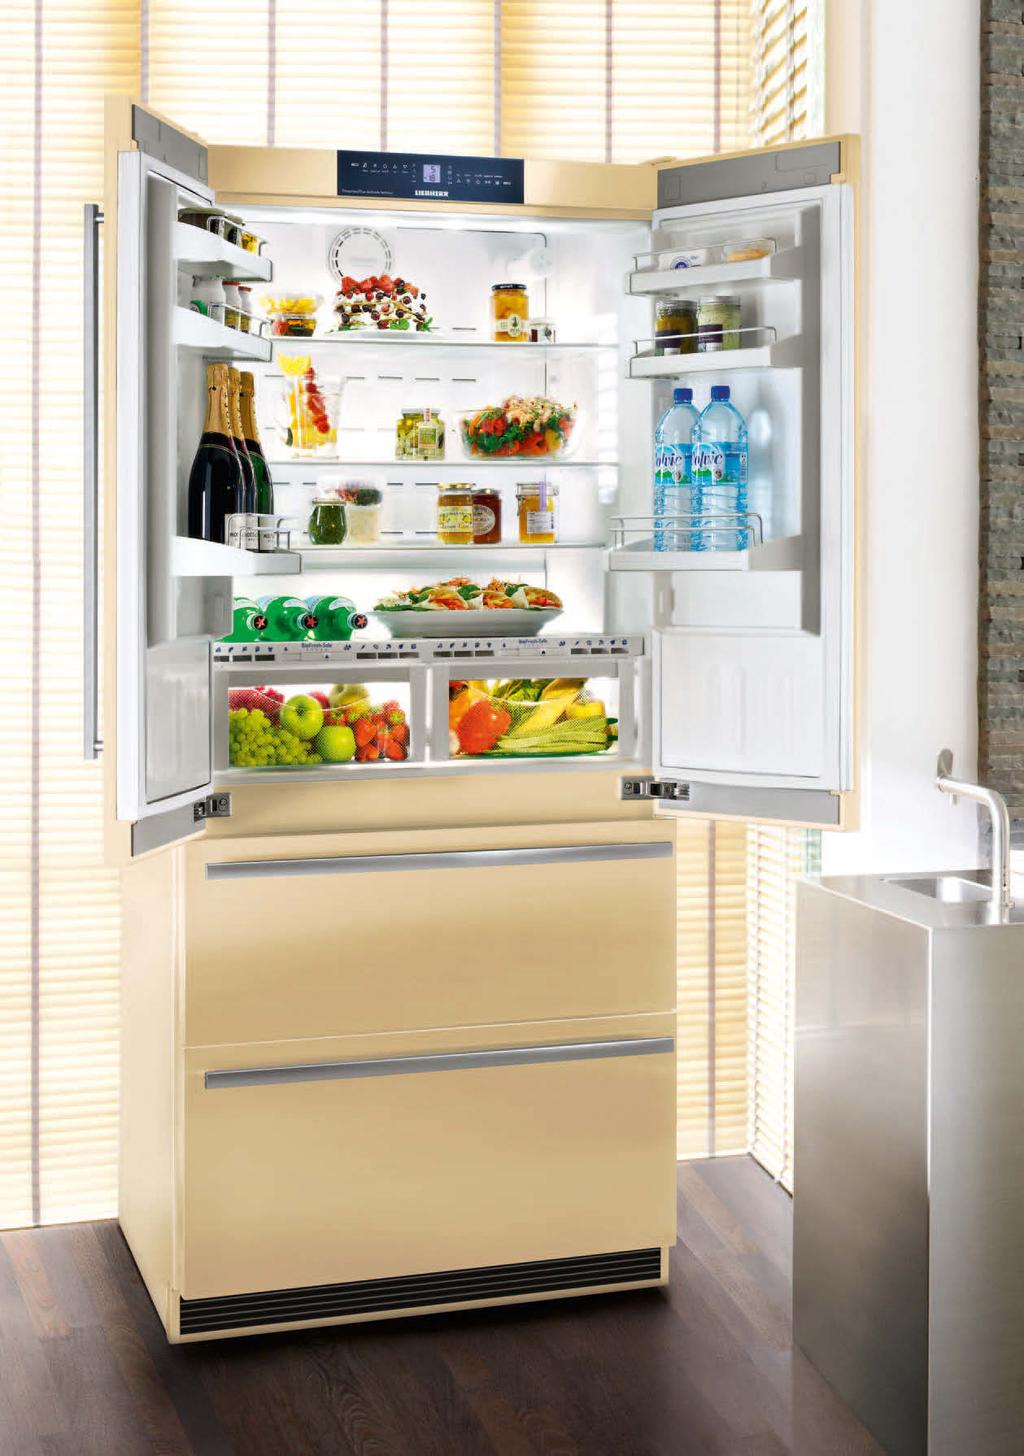 Frenchdoor fridge-freezer with BioFresh and NoFrost: CBNbe 656 The Food Storage Centre CBNbe 656 with its elegant Frenchdoor concept is a focal point in any kitchen, open or closed.